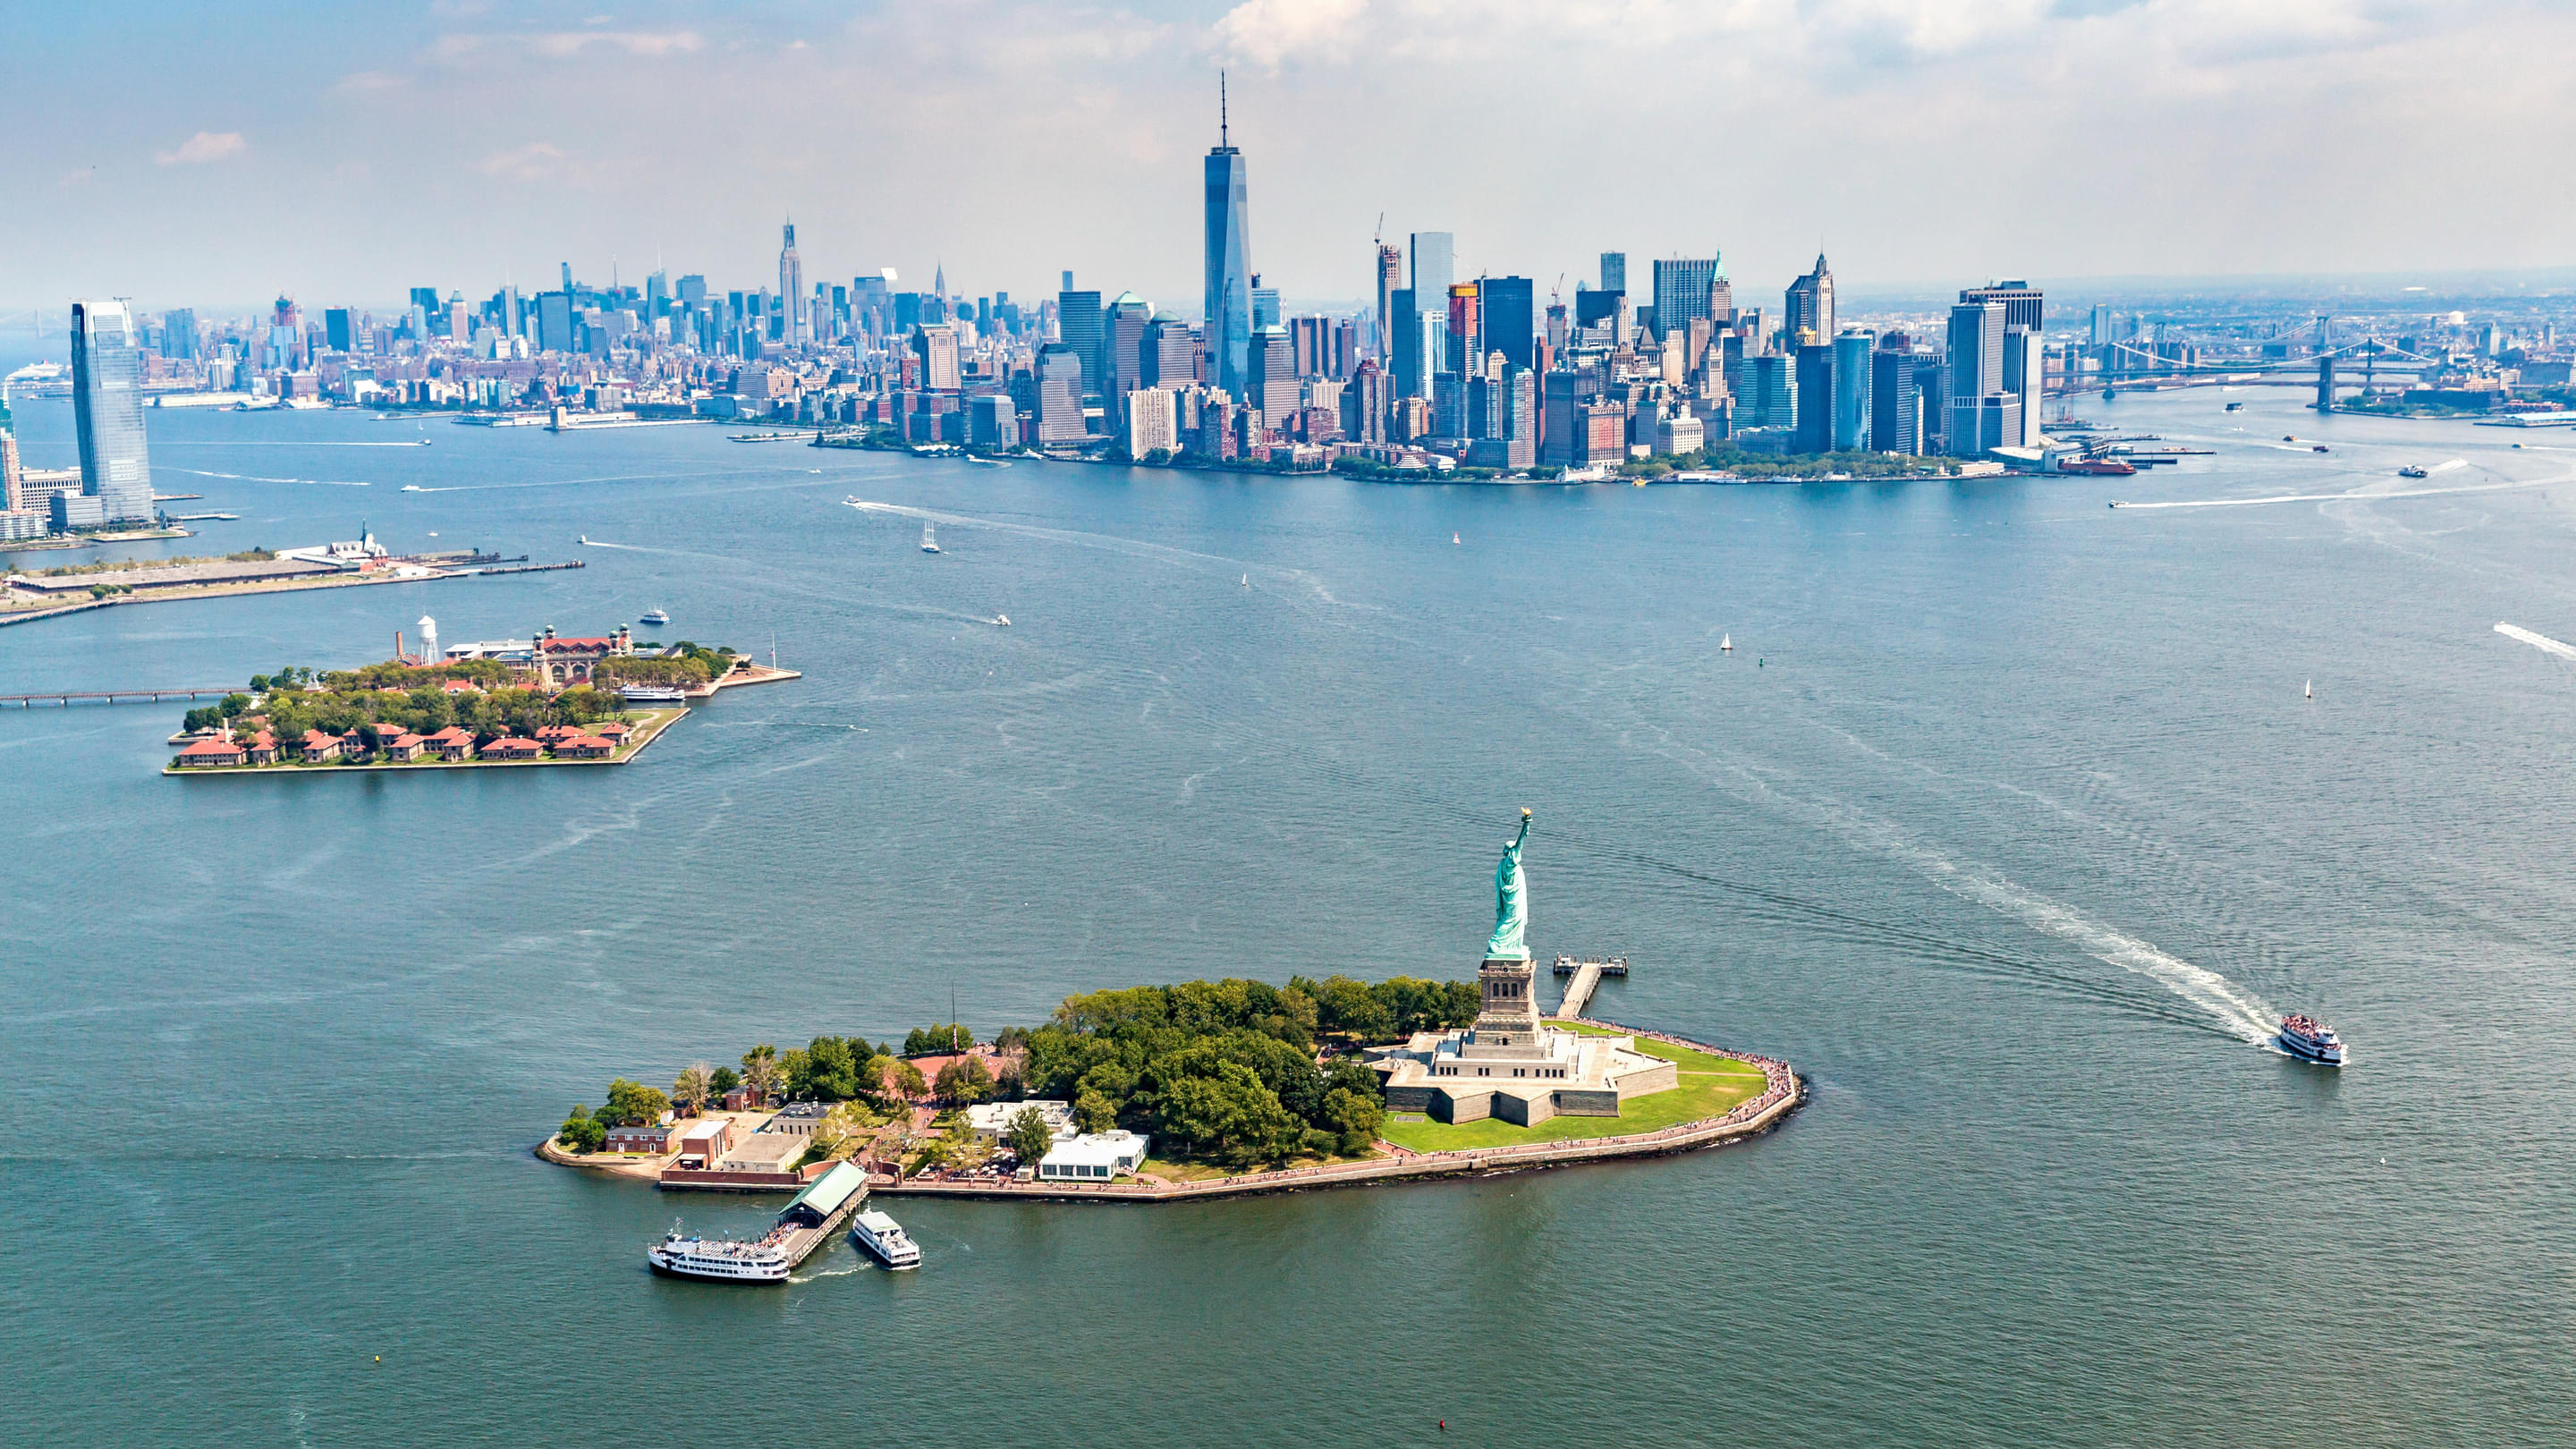 Liberty Island Overview